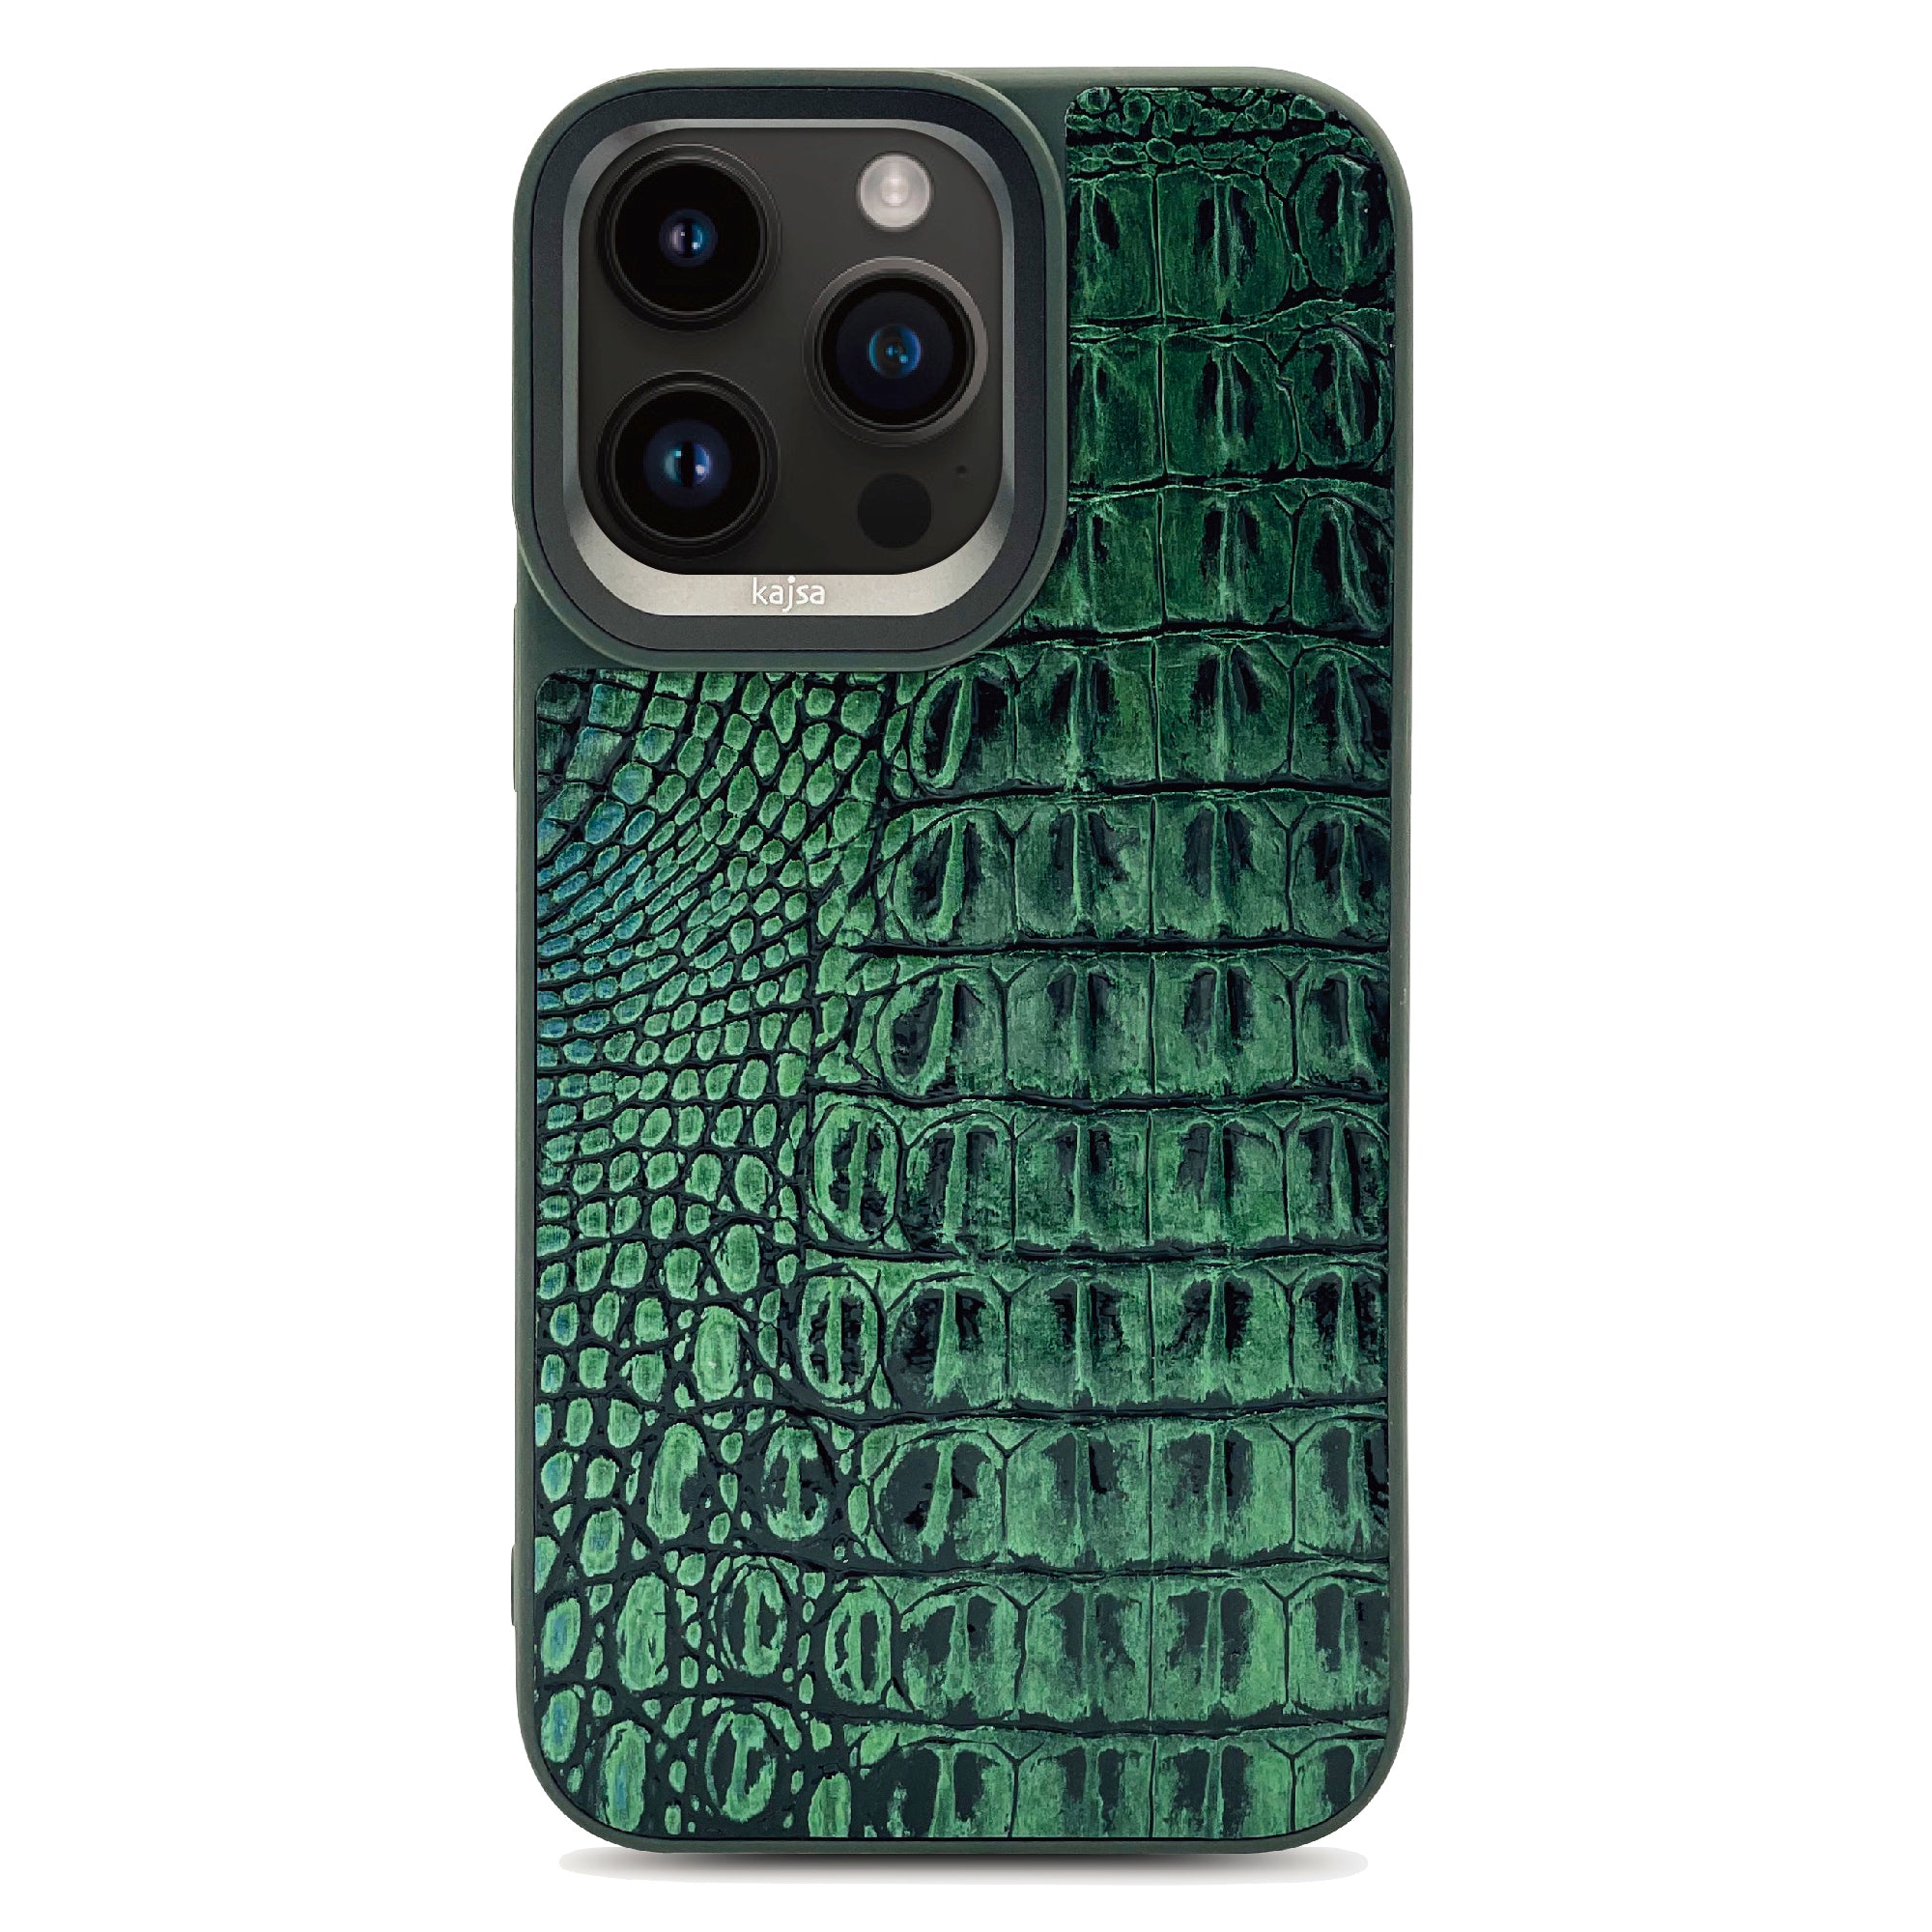 Glamorous Collection - Beast Back Case for iPhone 14-Phone Case- phone case - phone cases- phone cover- iphone cover- iphone case- iphone cases- leather case- leather cases- DIYCASE - custom case - leather cover - hand strap case - croco pattern case - snake pattern case - carbon fiber phone case - phone case brand - unique phone case - high quality - phone case brand - protective case - buy phone case hong kong - online buy phone case - iphone‎手機殼 - 客製化手機殼 - samsung ‎手機殼 - 香港手機殼 - 買電話殼